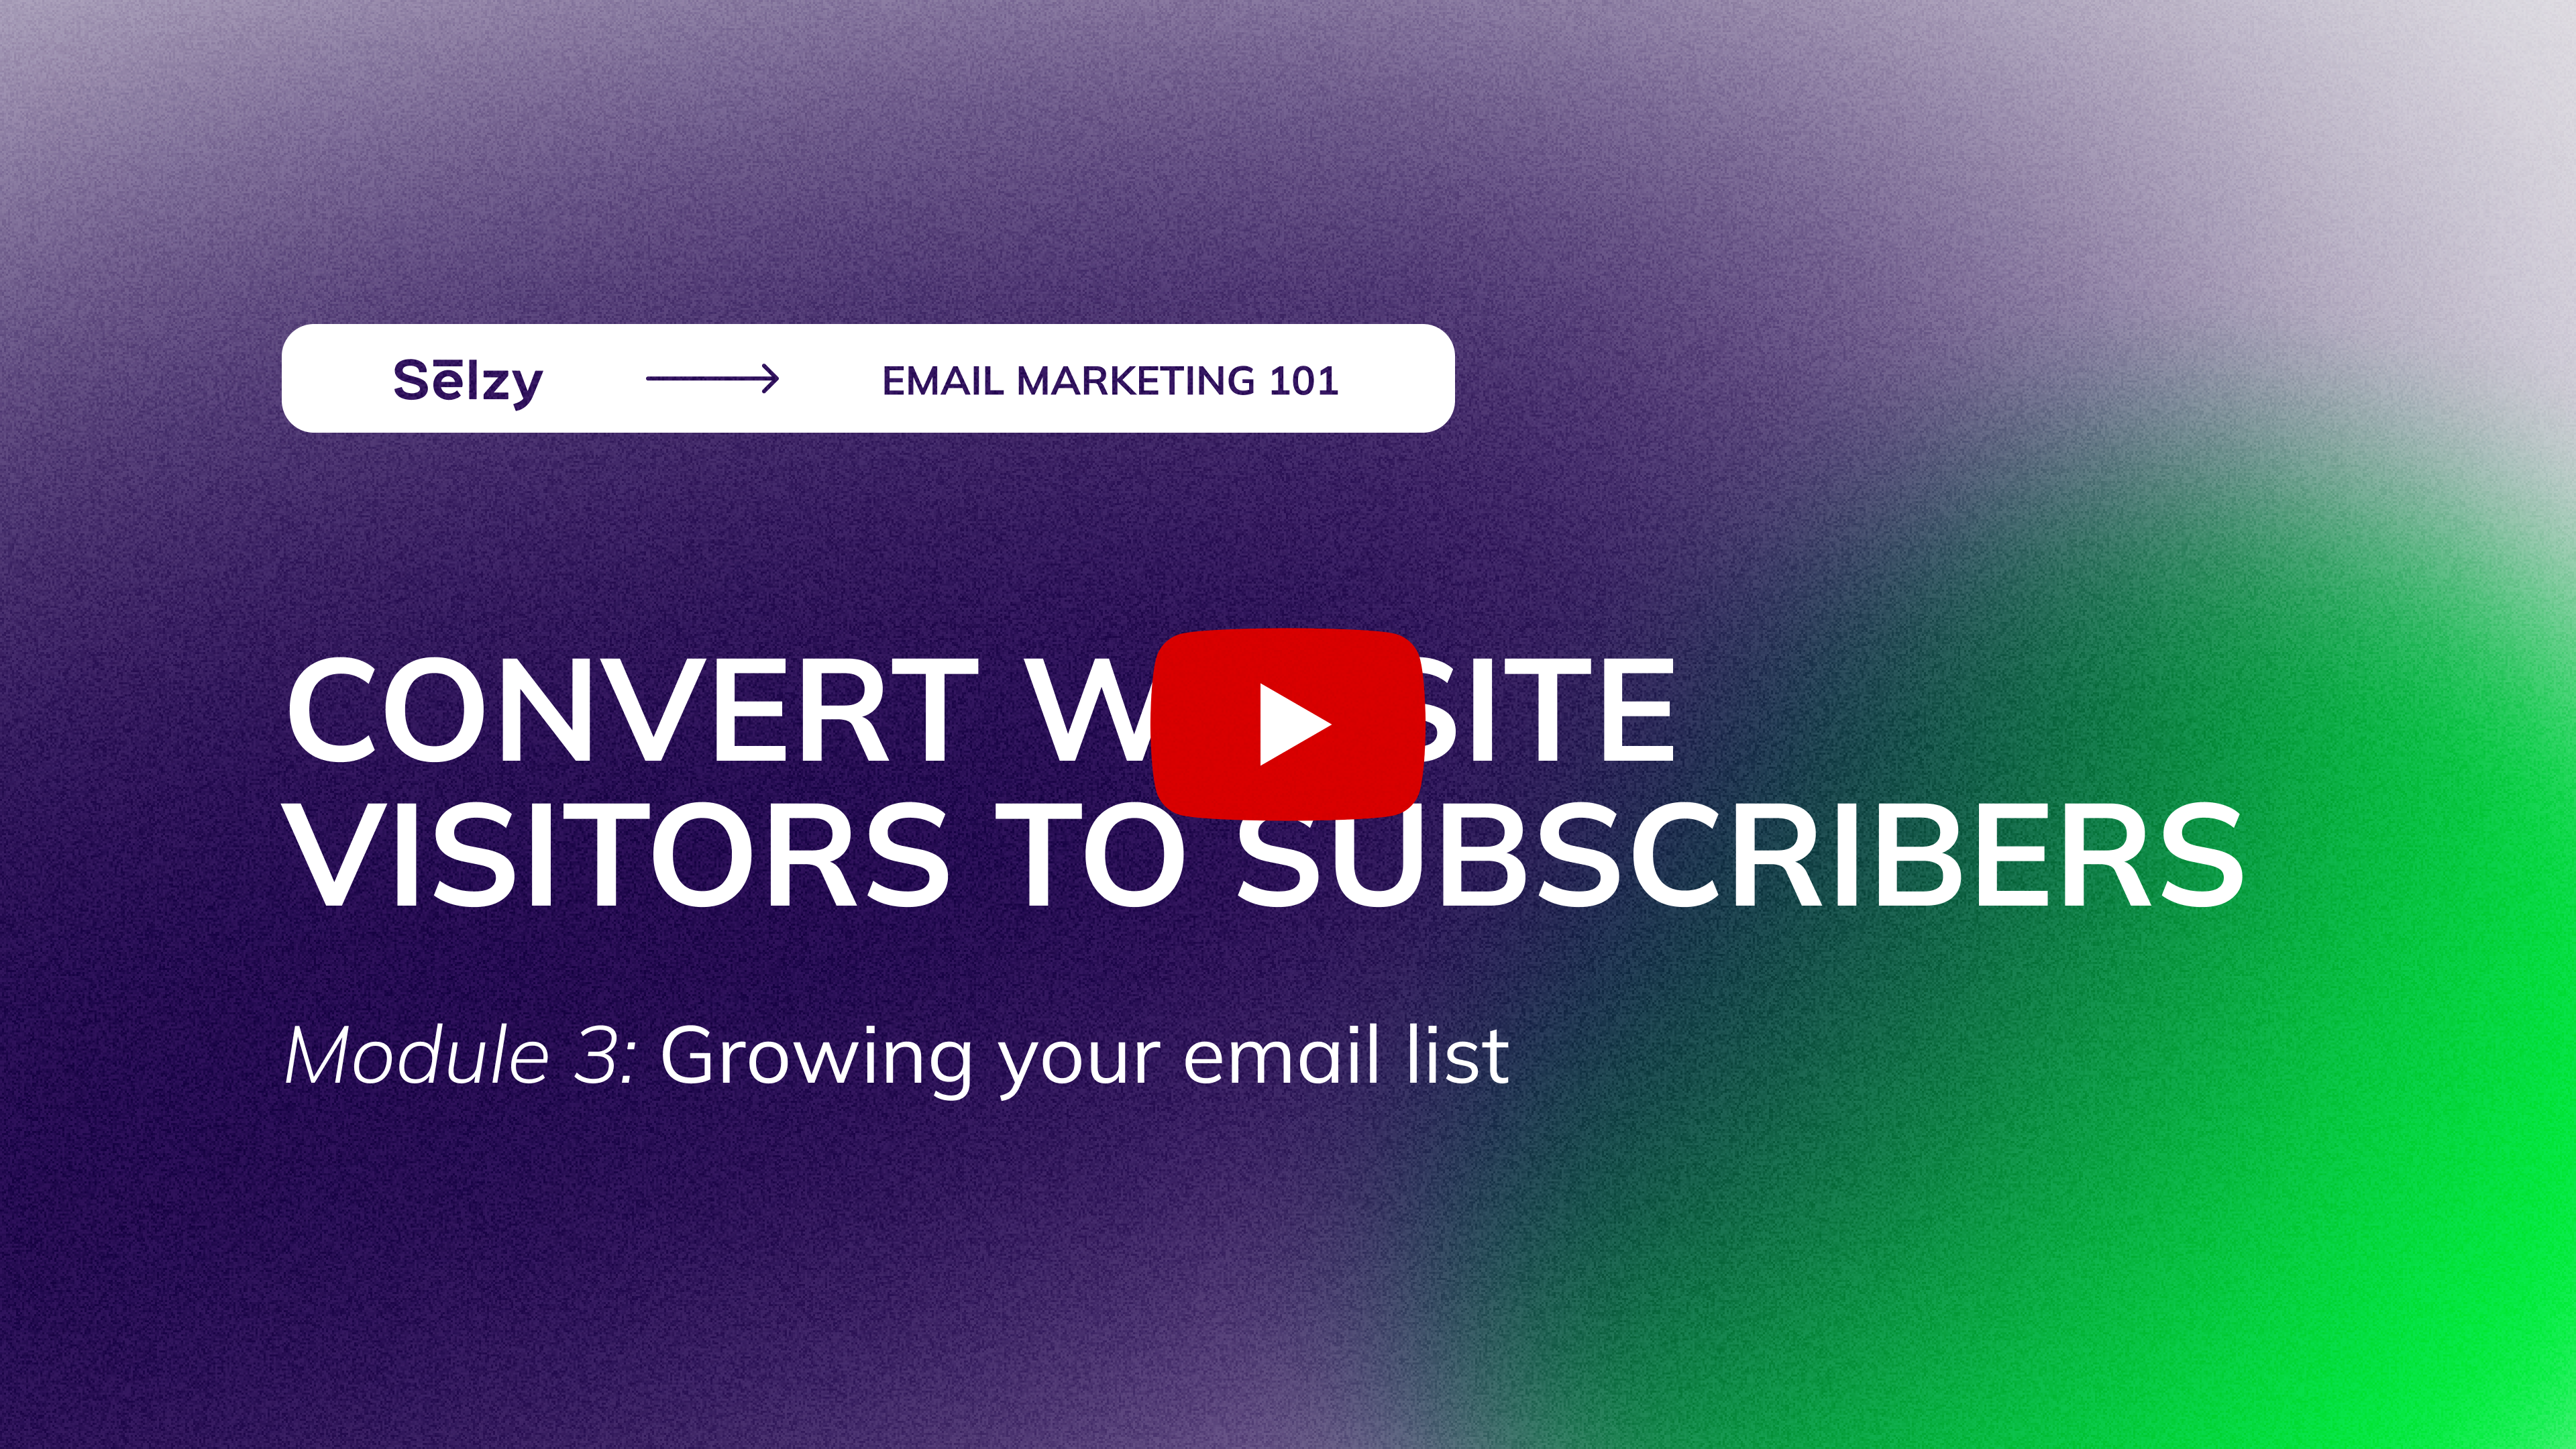 Lesson 6: Attracting New Subscribers with Website Sign-Up Forms